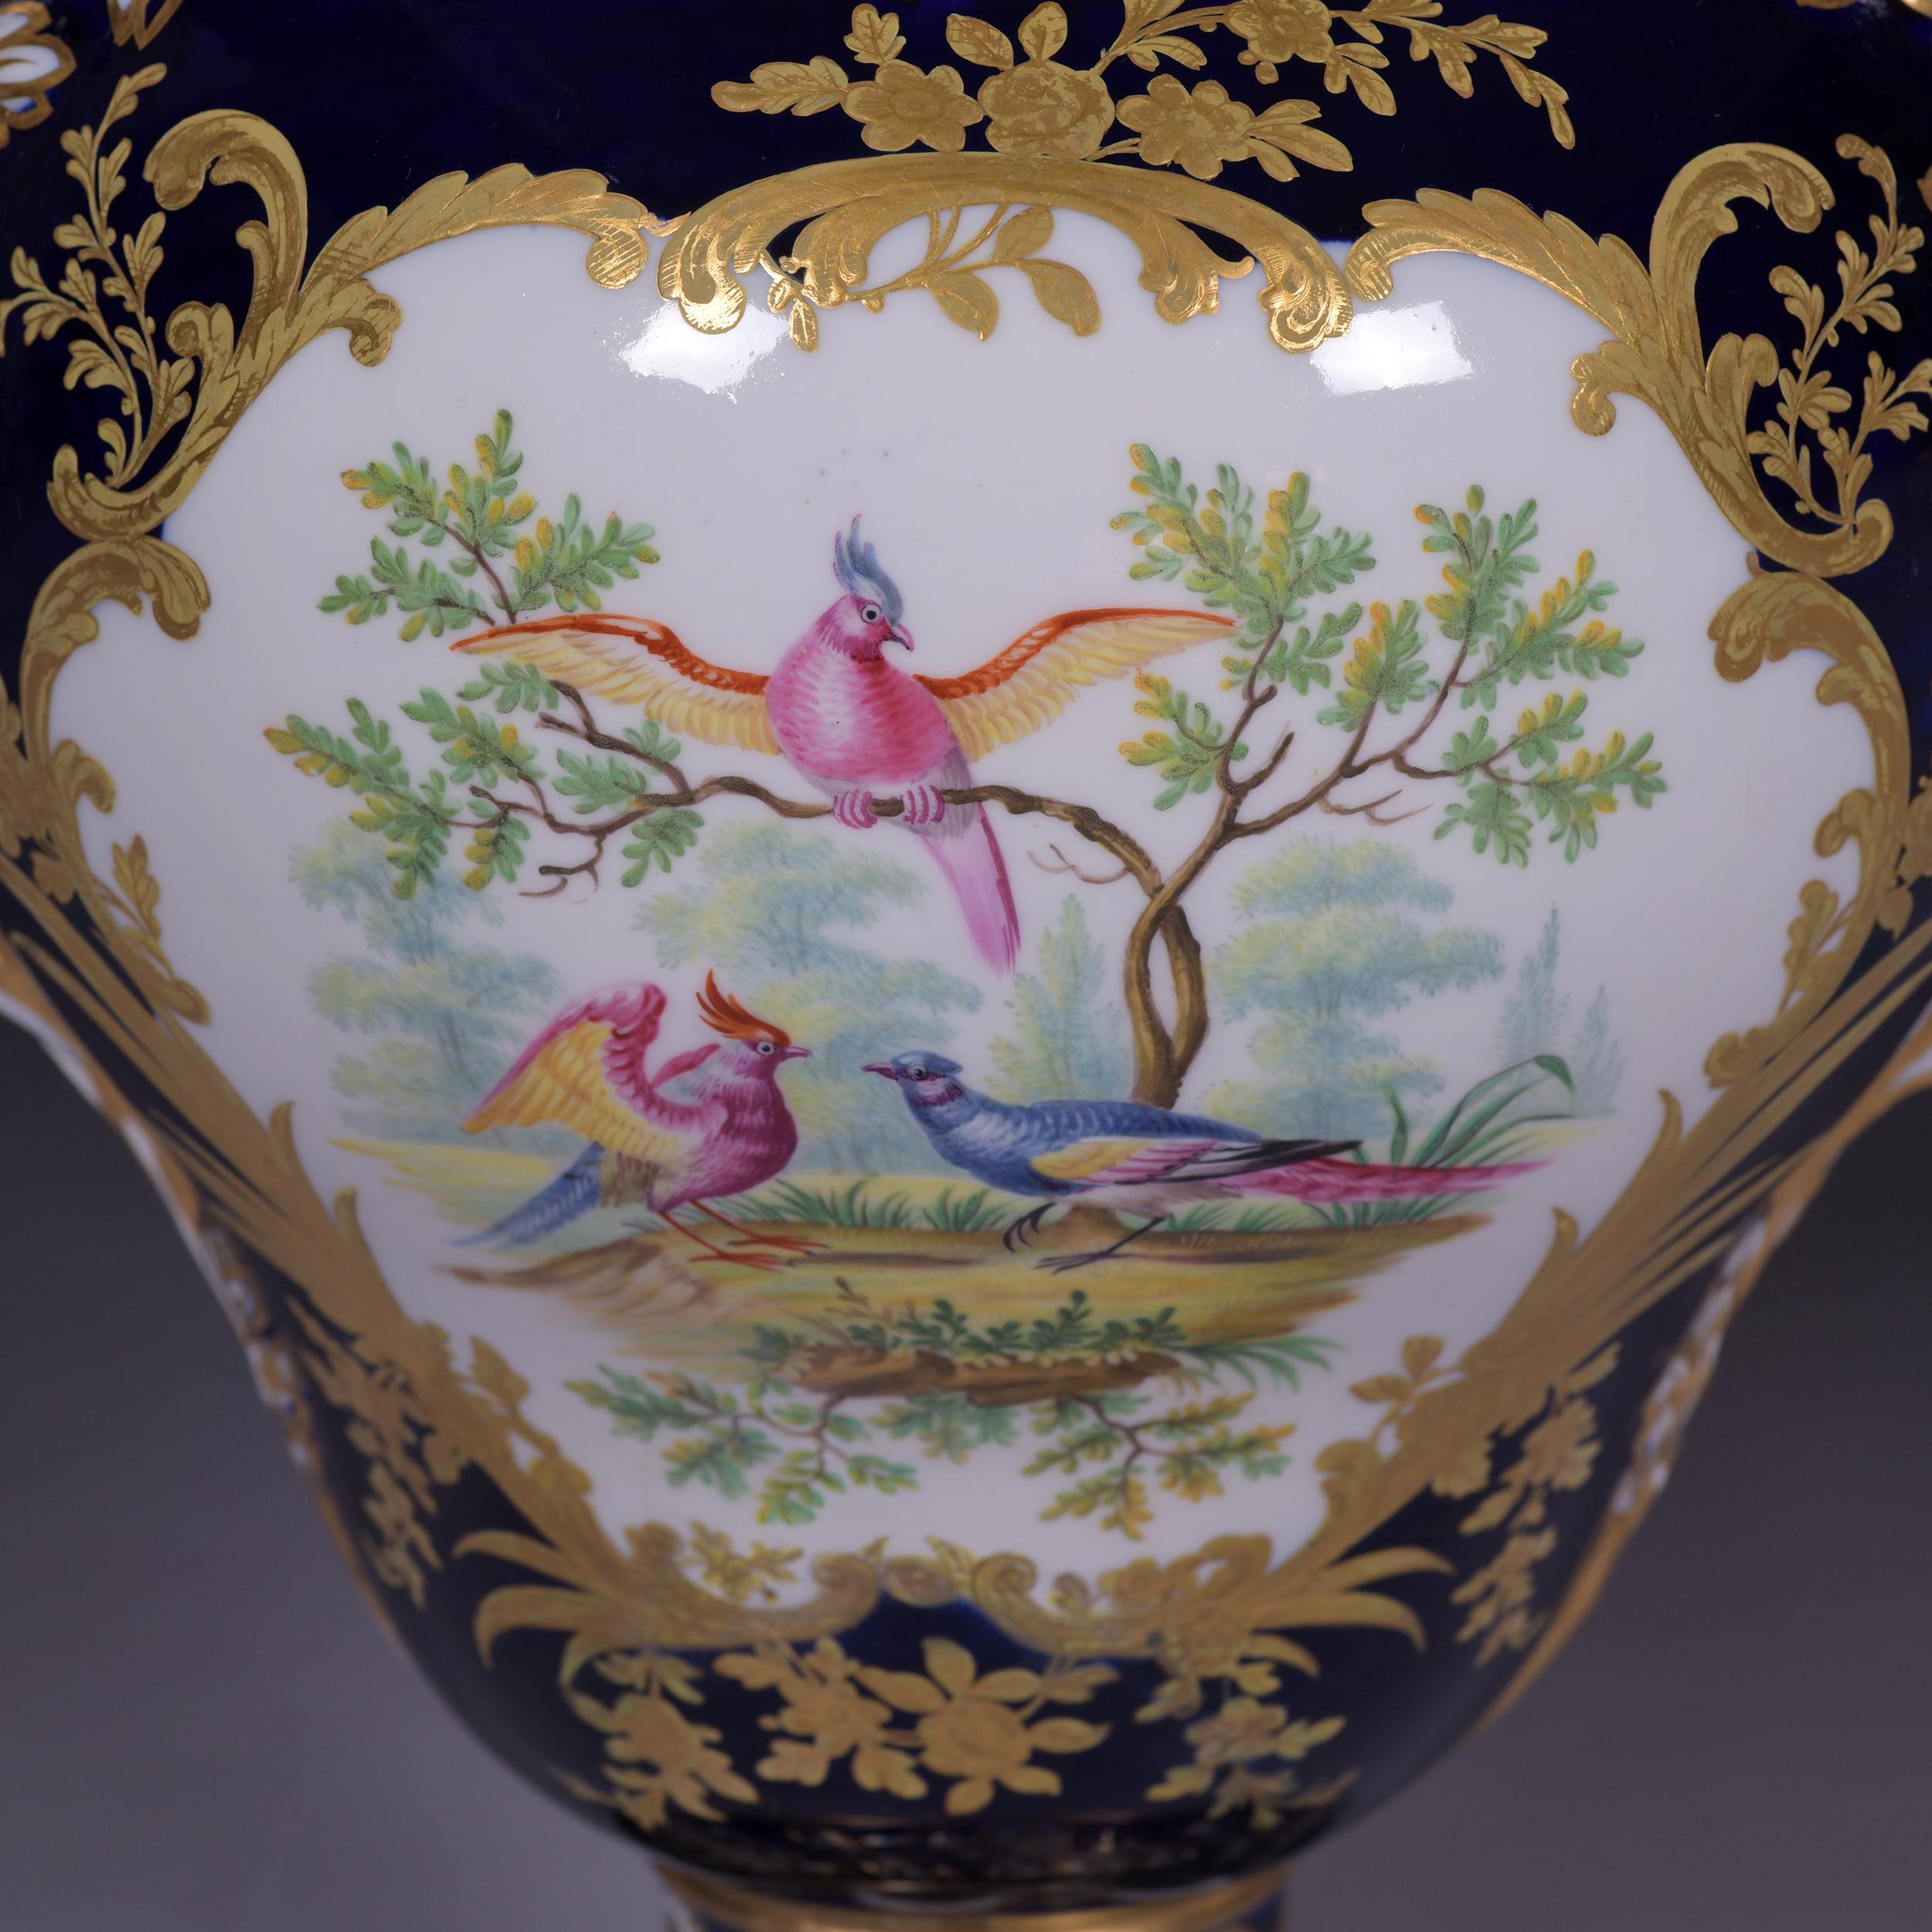 19th Century English Exhibition Porcelain Vase by Minton Painted by Martin Sneed For Sale 1